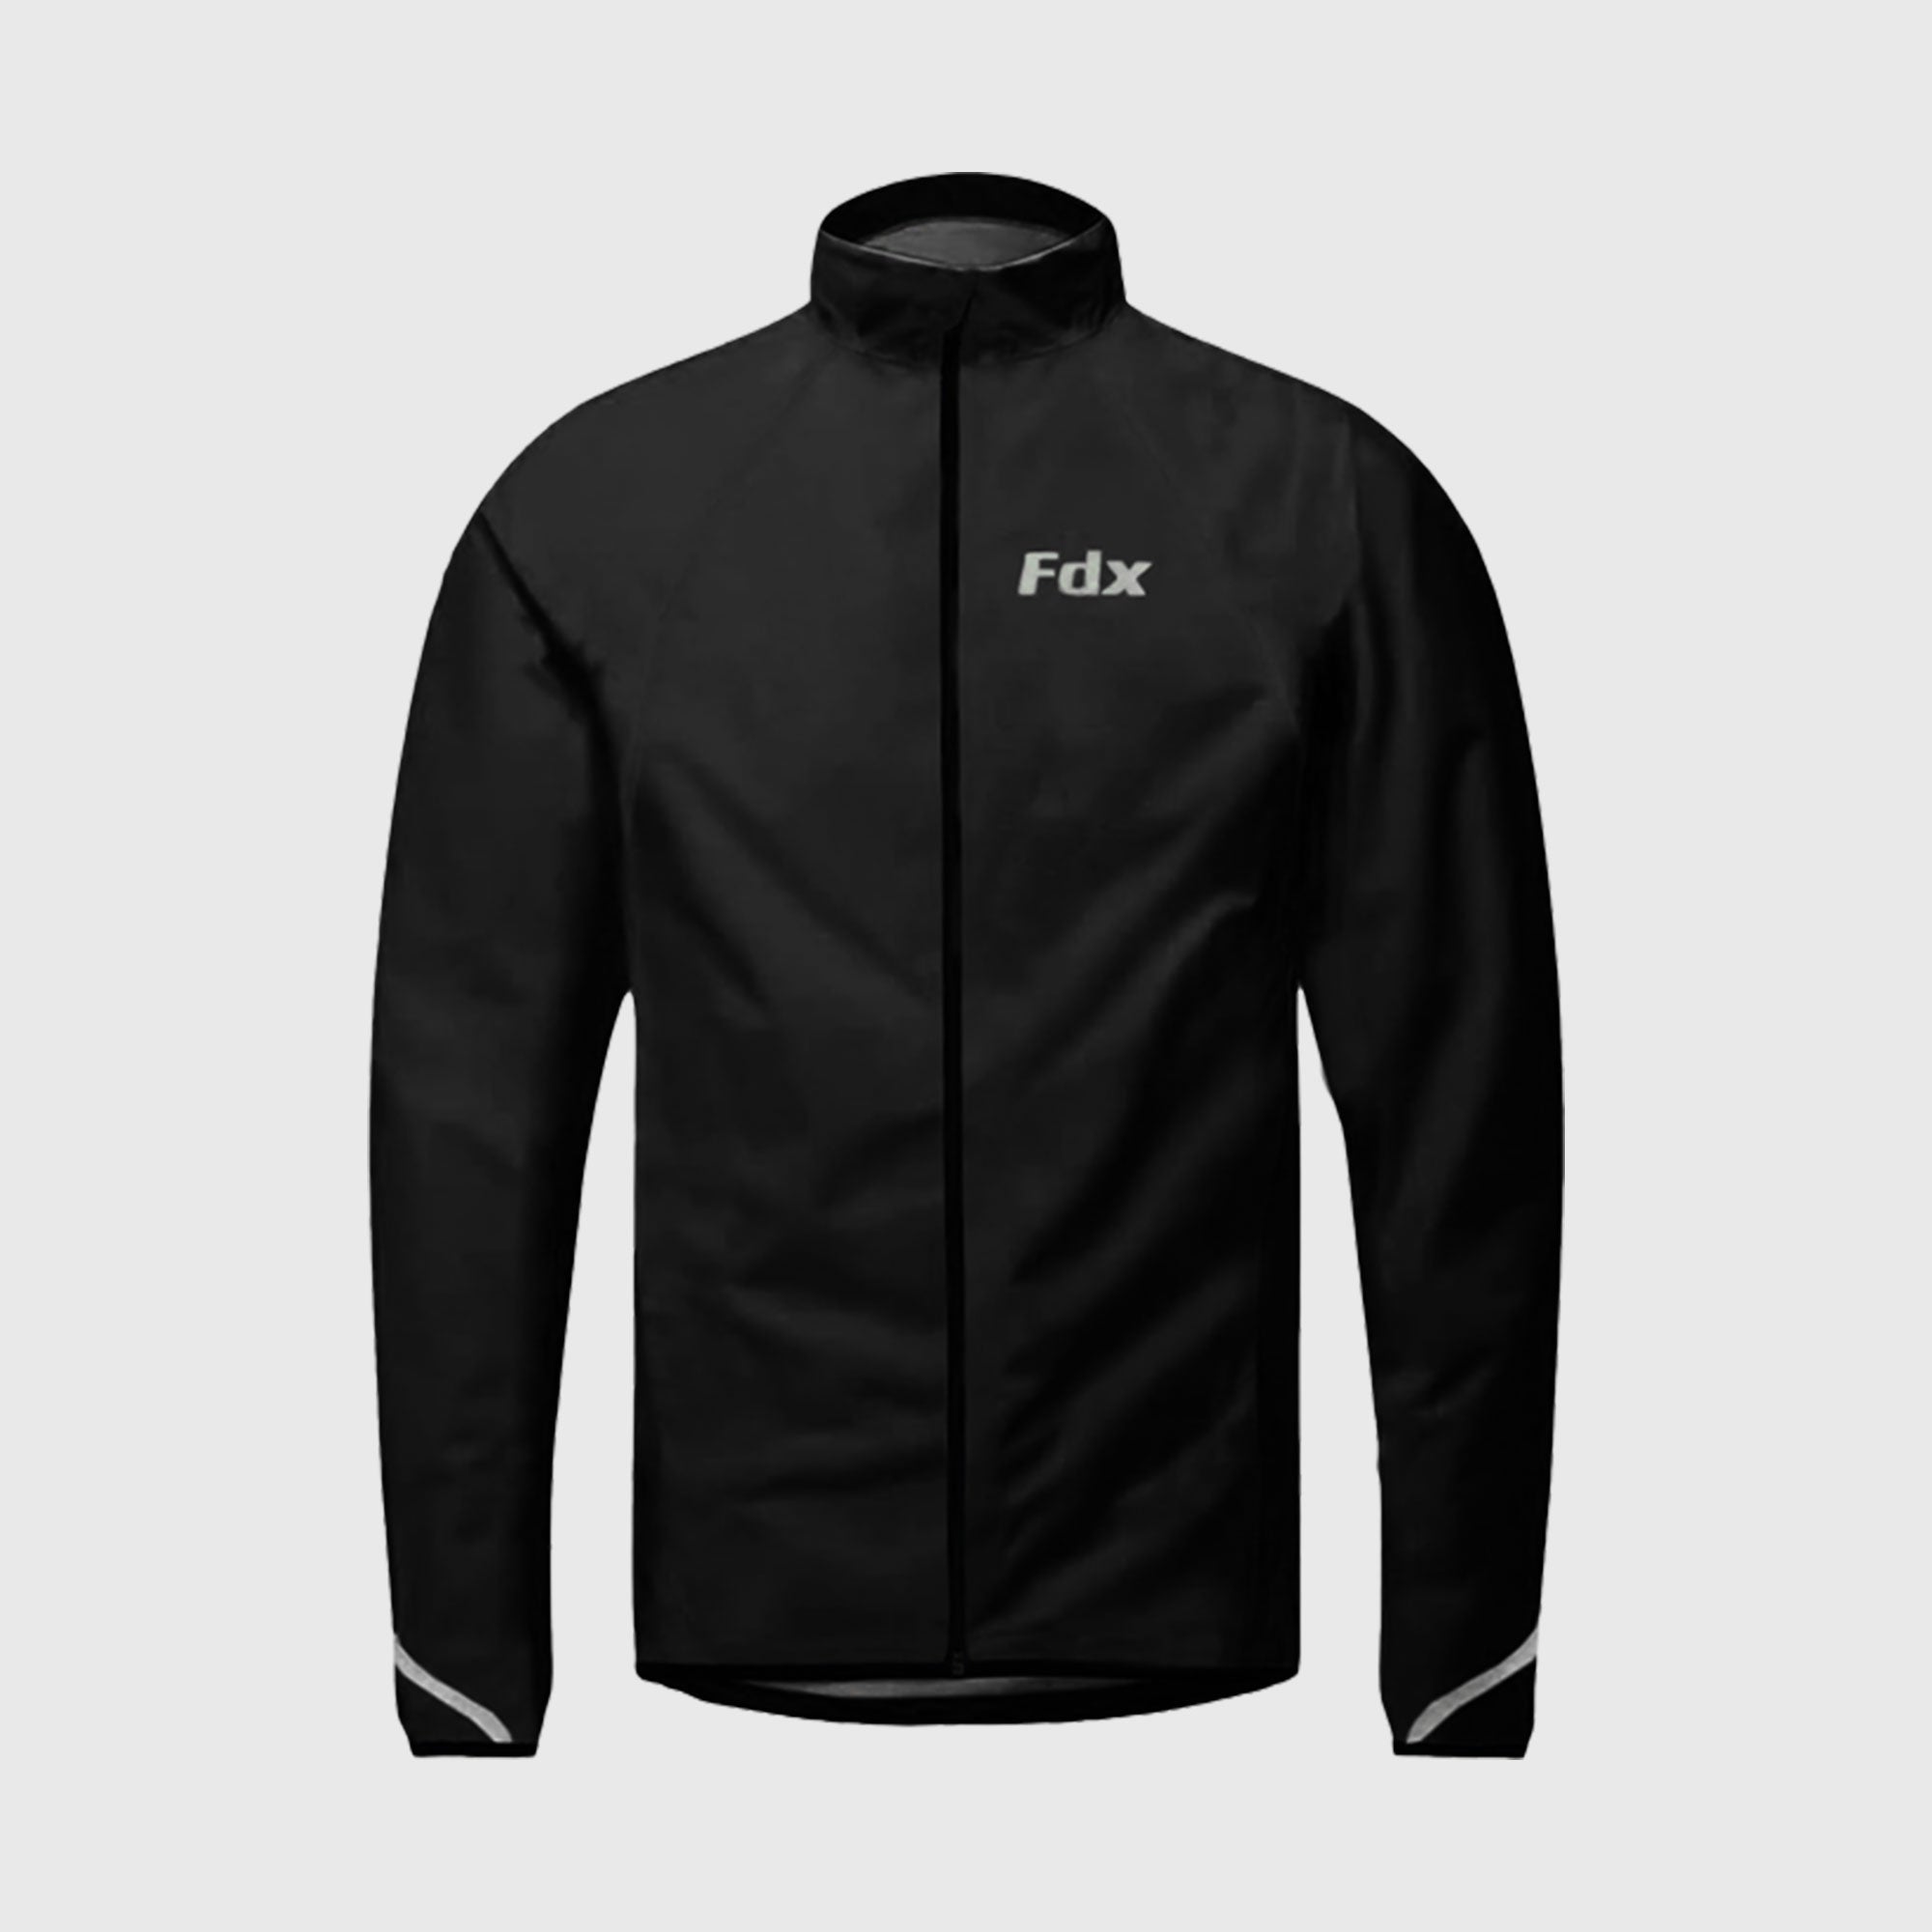 Fdx Men's Black Best Cycling Jacket for Winter Thermal Casual Softshell Clothing Lightweight, Shaver proof, Packable ,Windproof, Waterproof & Pockets